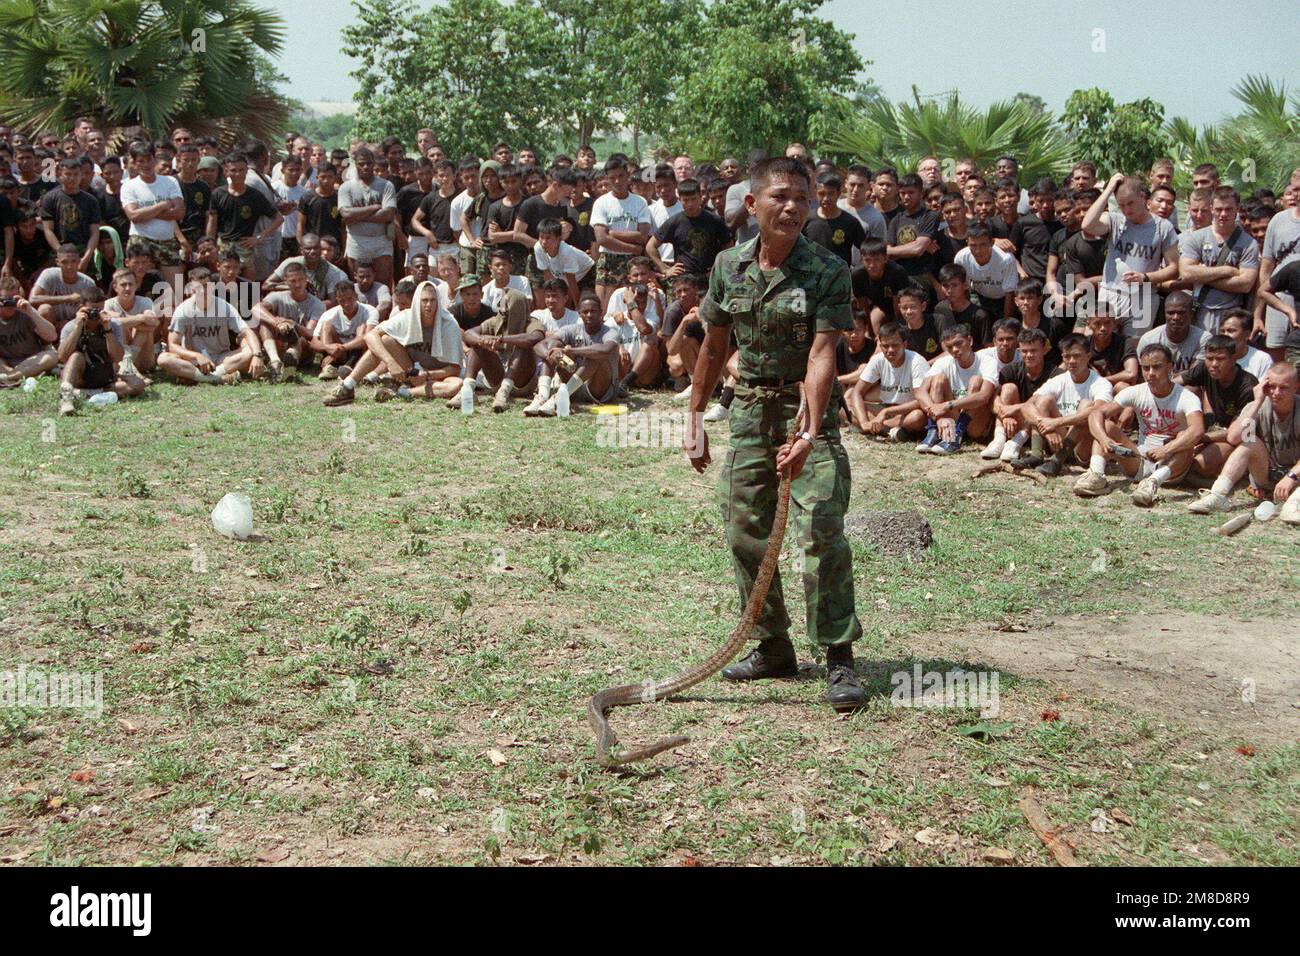 Members of 4th Bn., 22nd Inf., 25th Inf. Div. (Light), watch as a Royal Thai Army instructor teaches a class on the types of dangerous snakes found in Thailand. The 25th Infantry Division soldiers are in Thailand for the combined Thai/U.S. exercise Cobra Gold '90. Subject Operation/Series: COBRA GOLD '90 Base: Chon Buri Country: Thailand (THA) Stock Photo